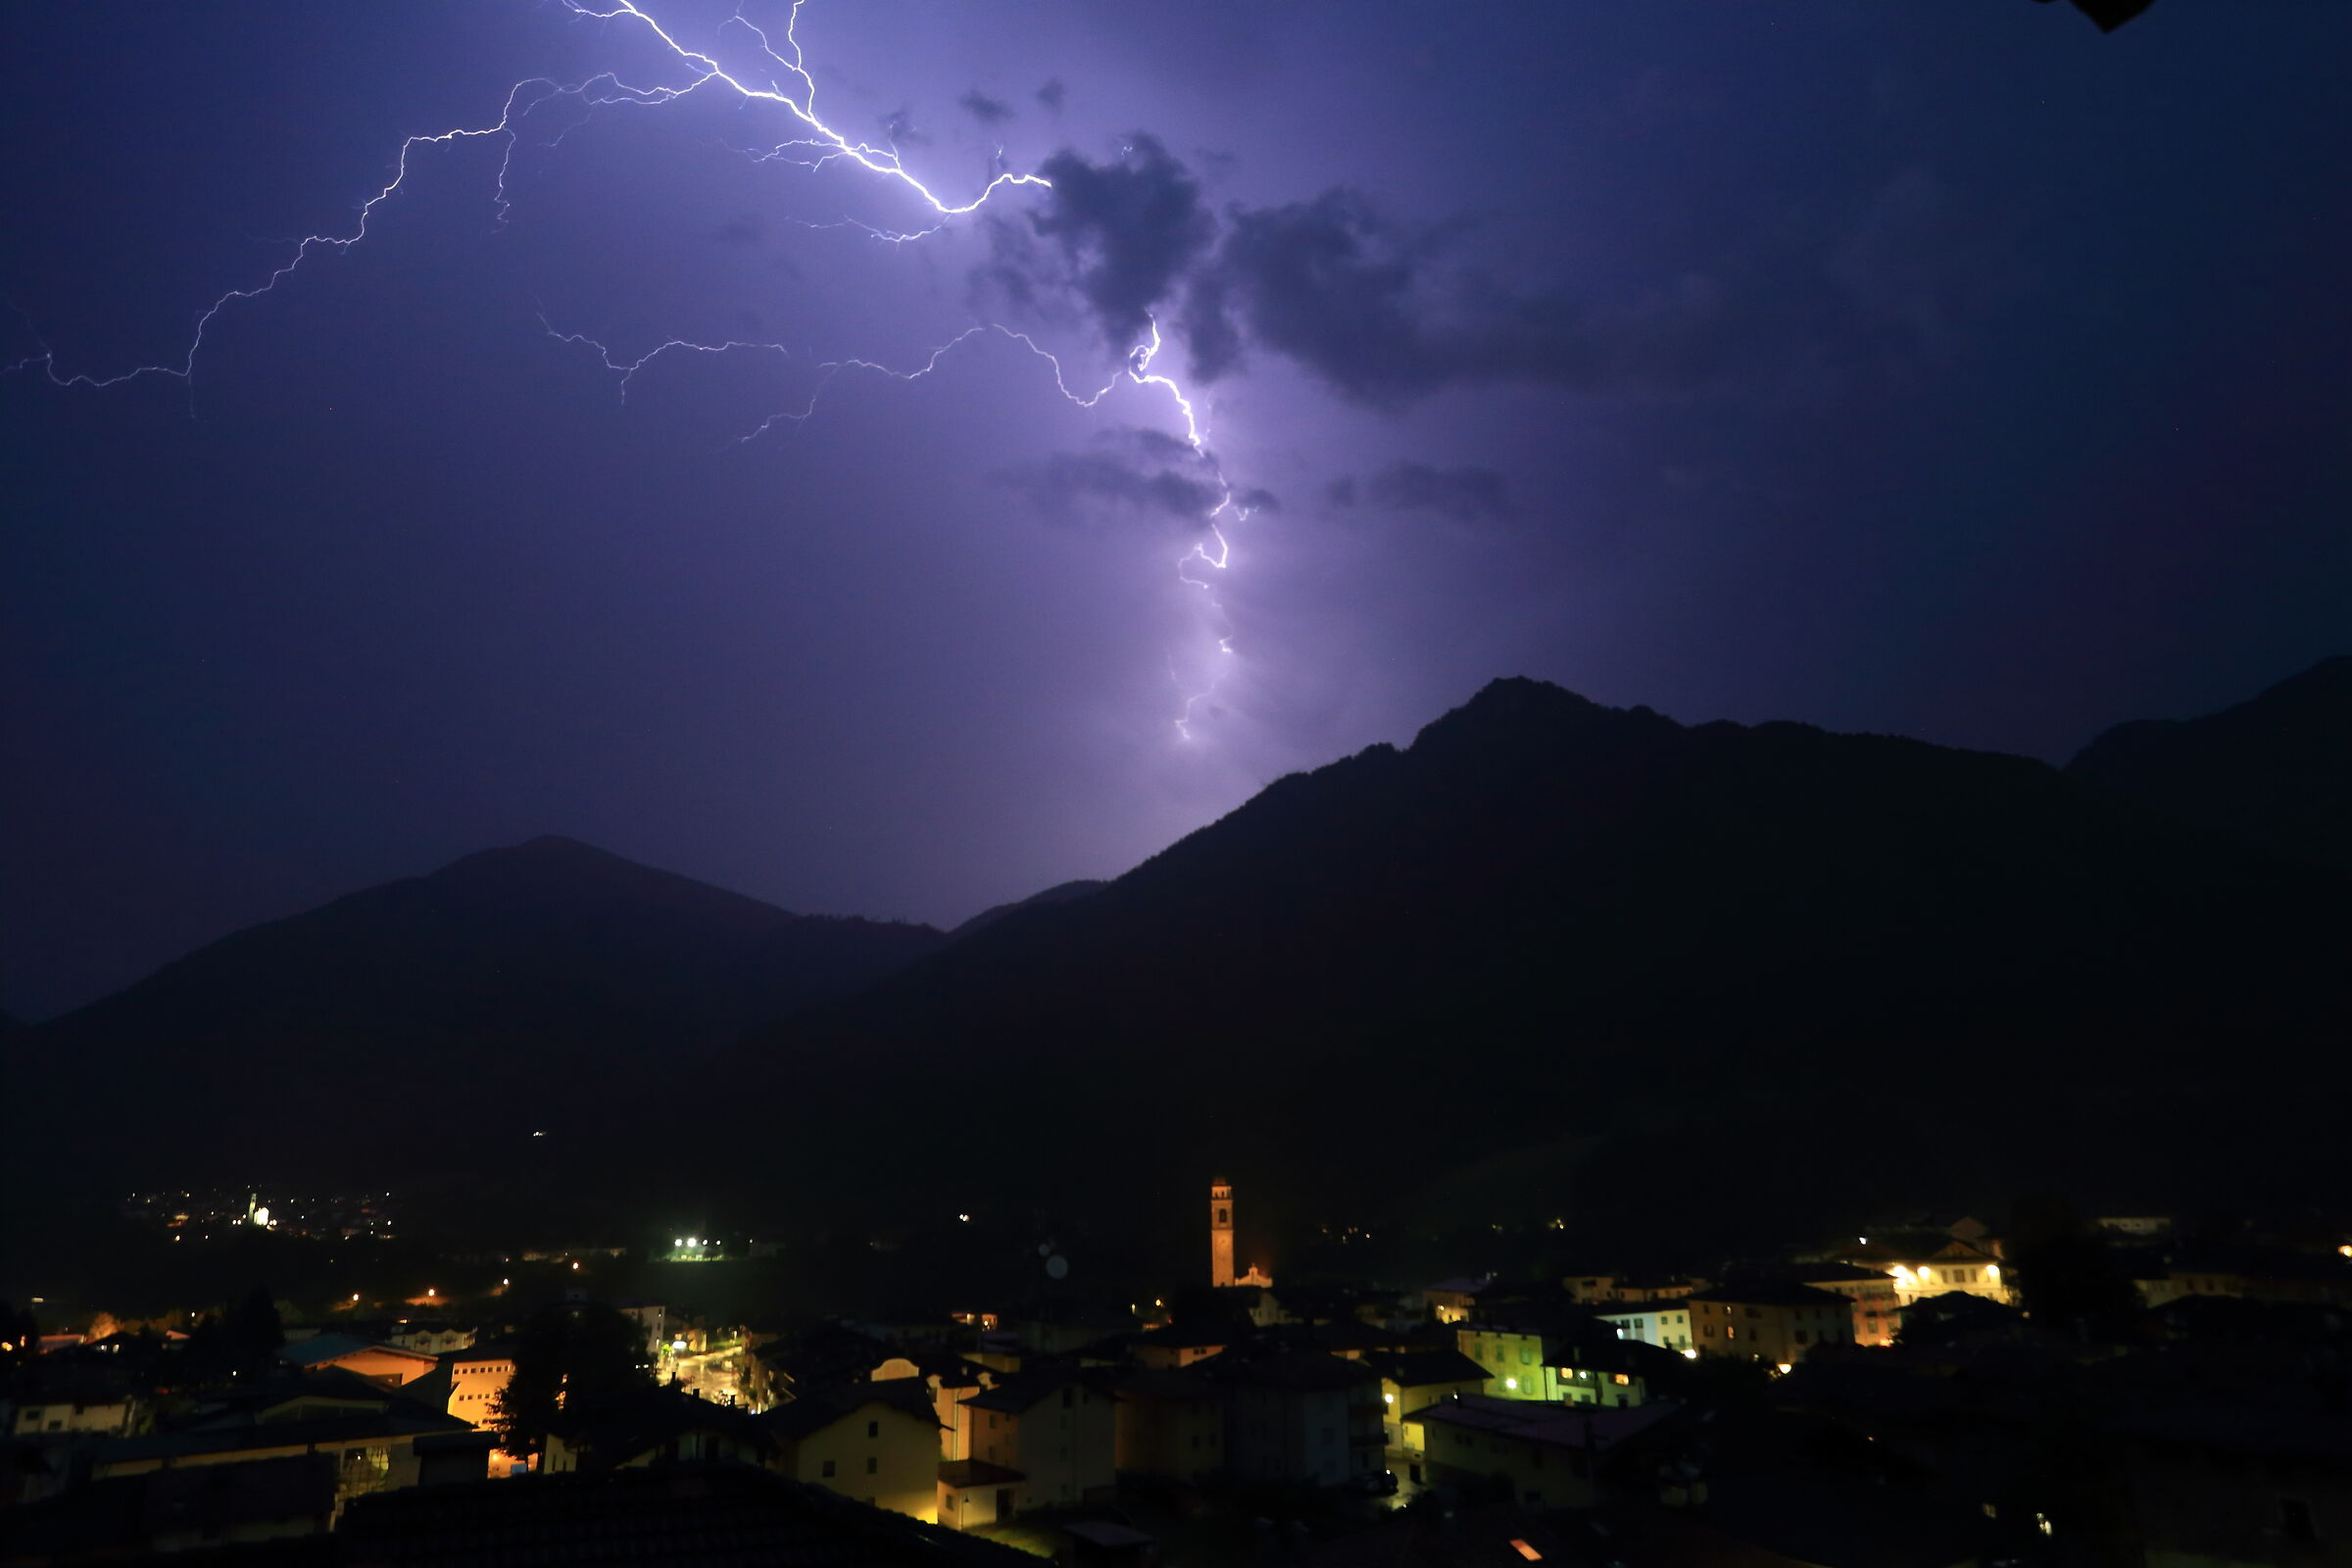 Thunderstorm at Tione di Trento...